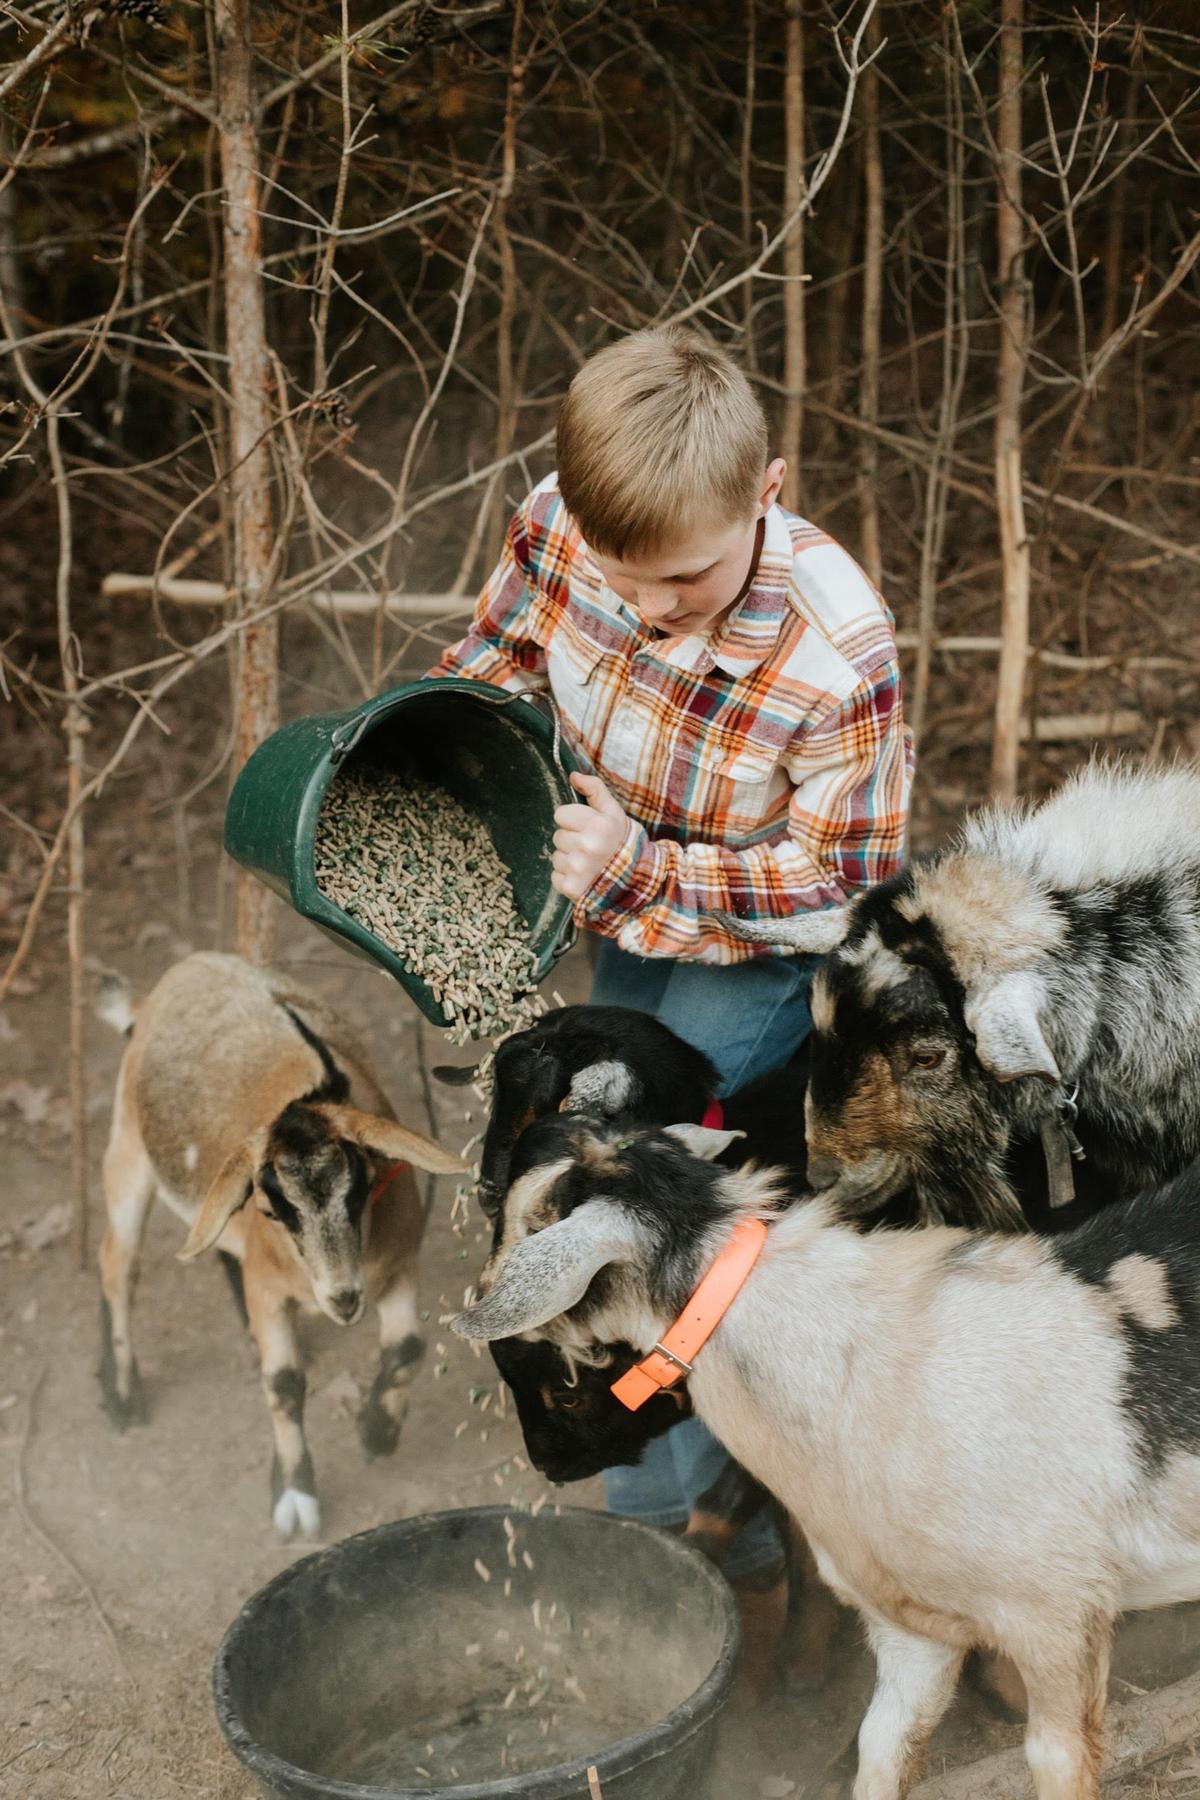 Cortney and Samuel's son feeds the goats. (Courtesy of The Tiffaney Lawson Company)